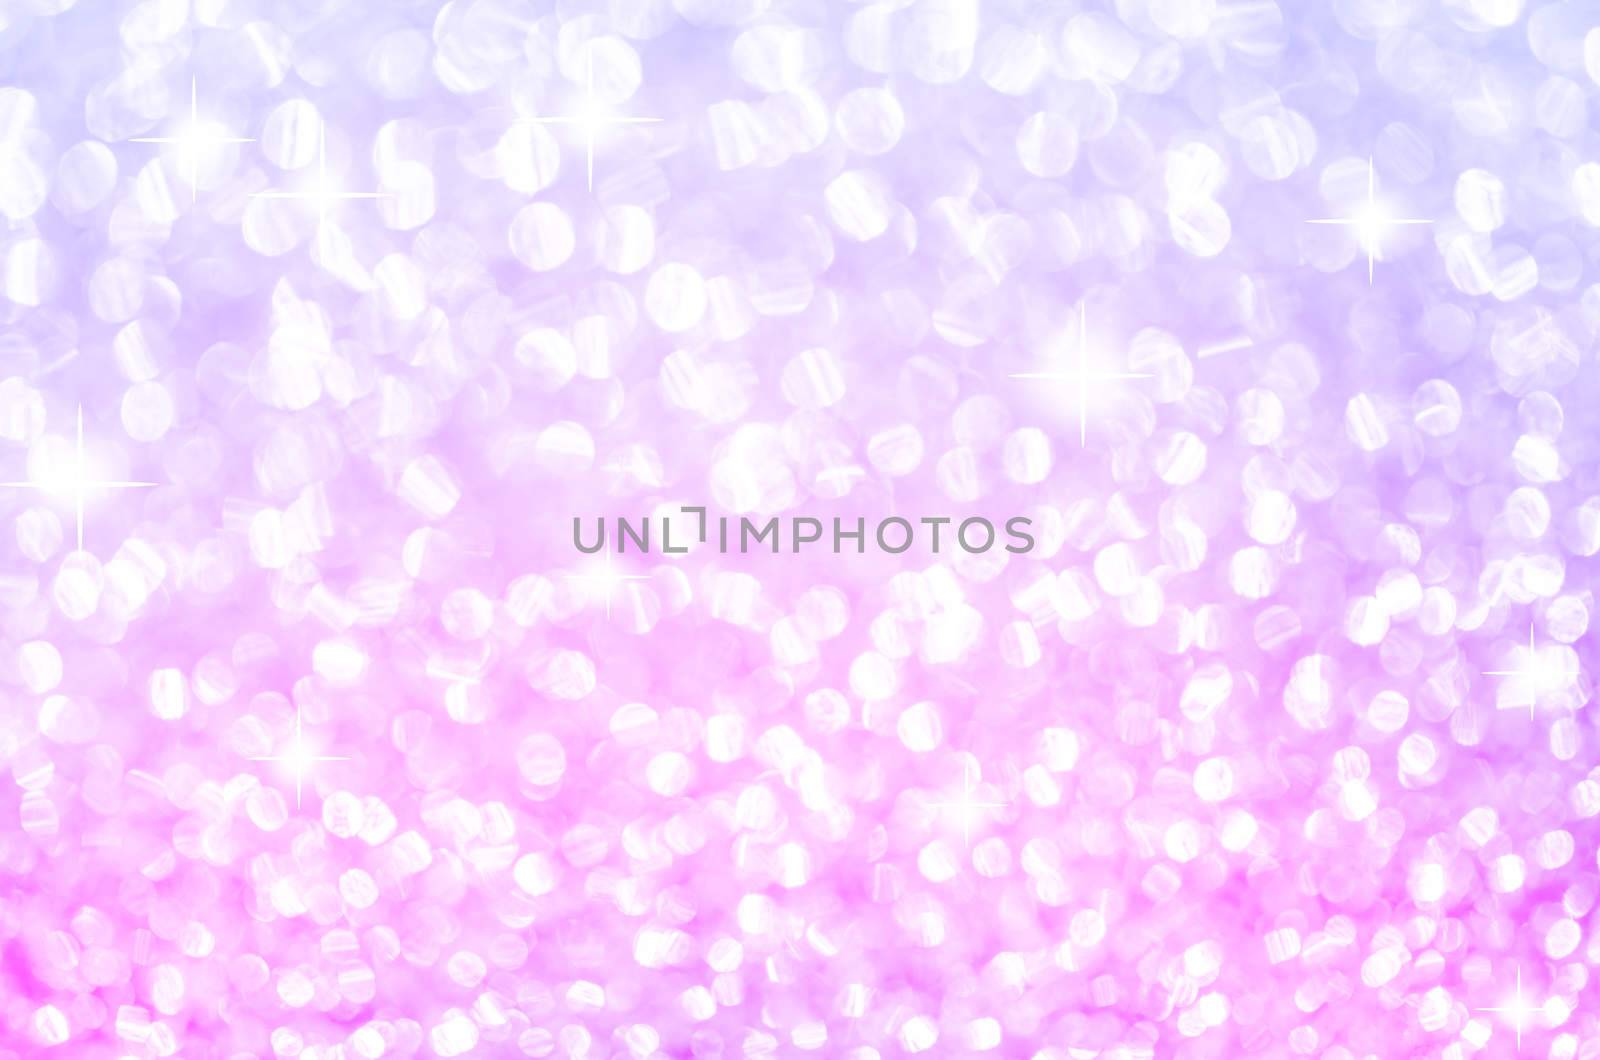 Lights on pink with star bokeh background.